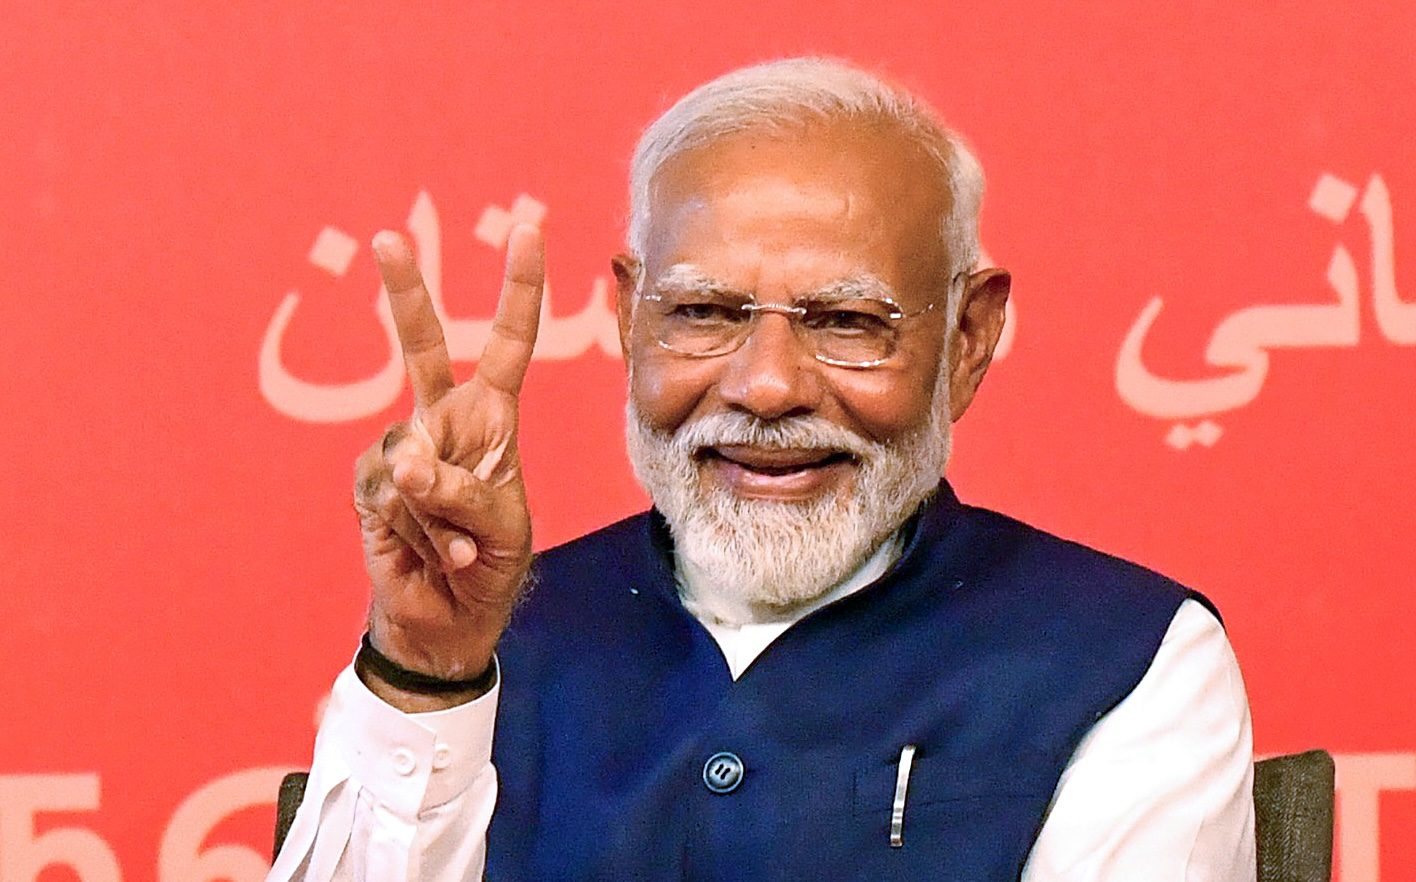 Indian prime minister Narendra Modi, who claimed victory in the elections this week, says the corridor forms the 'basis of world trade for hundreds of years to come'